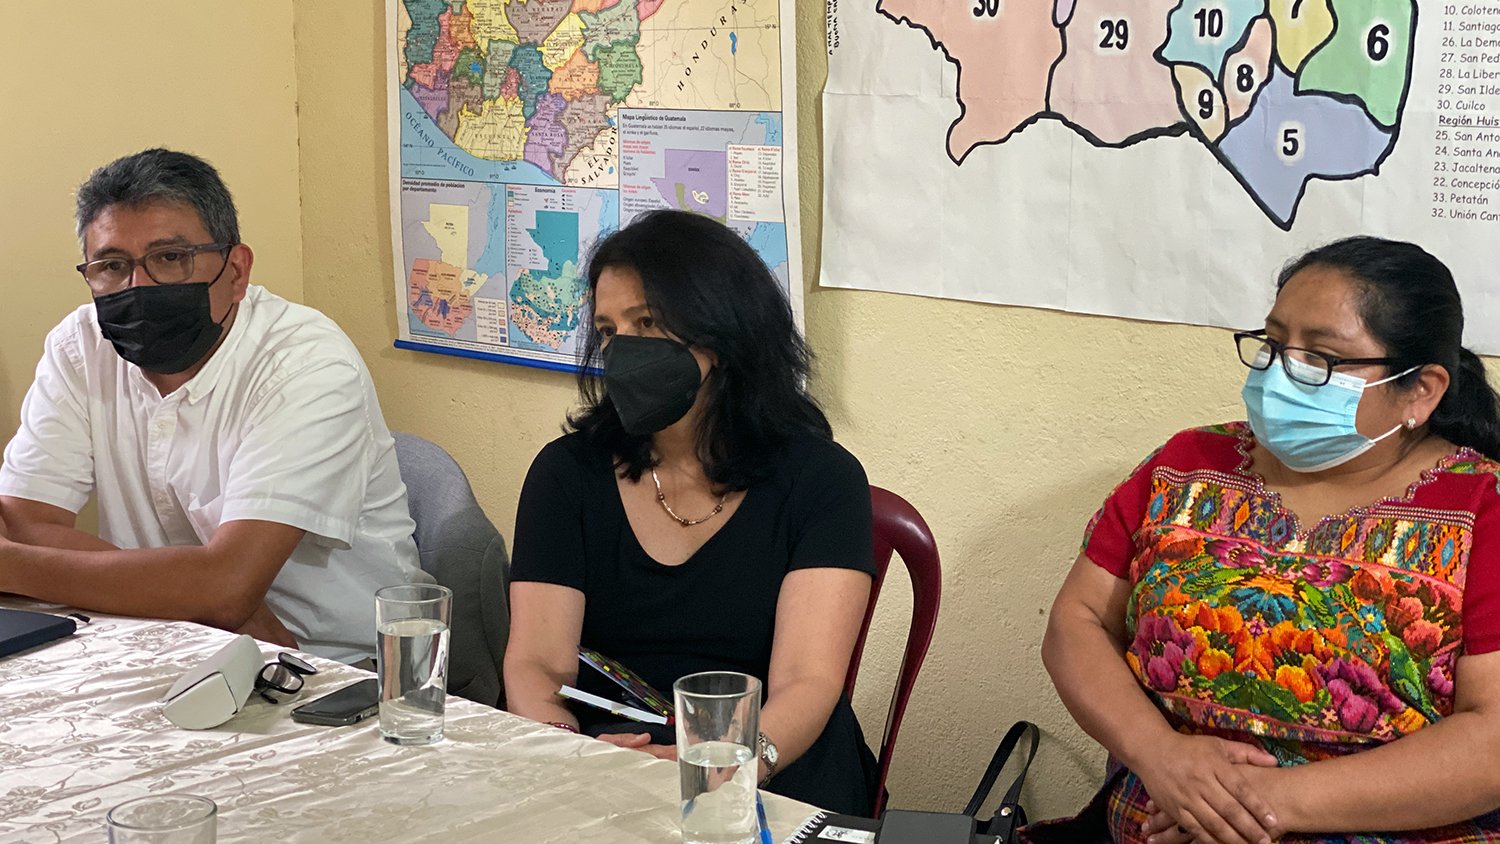  Alianza Americas’ Board of Directors, Vice President Abel Nuñez (left) and Associate Director for Programs Helena Olea (middle), meeting with advocates in Guatemala during VP Harris' visit to the region. 